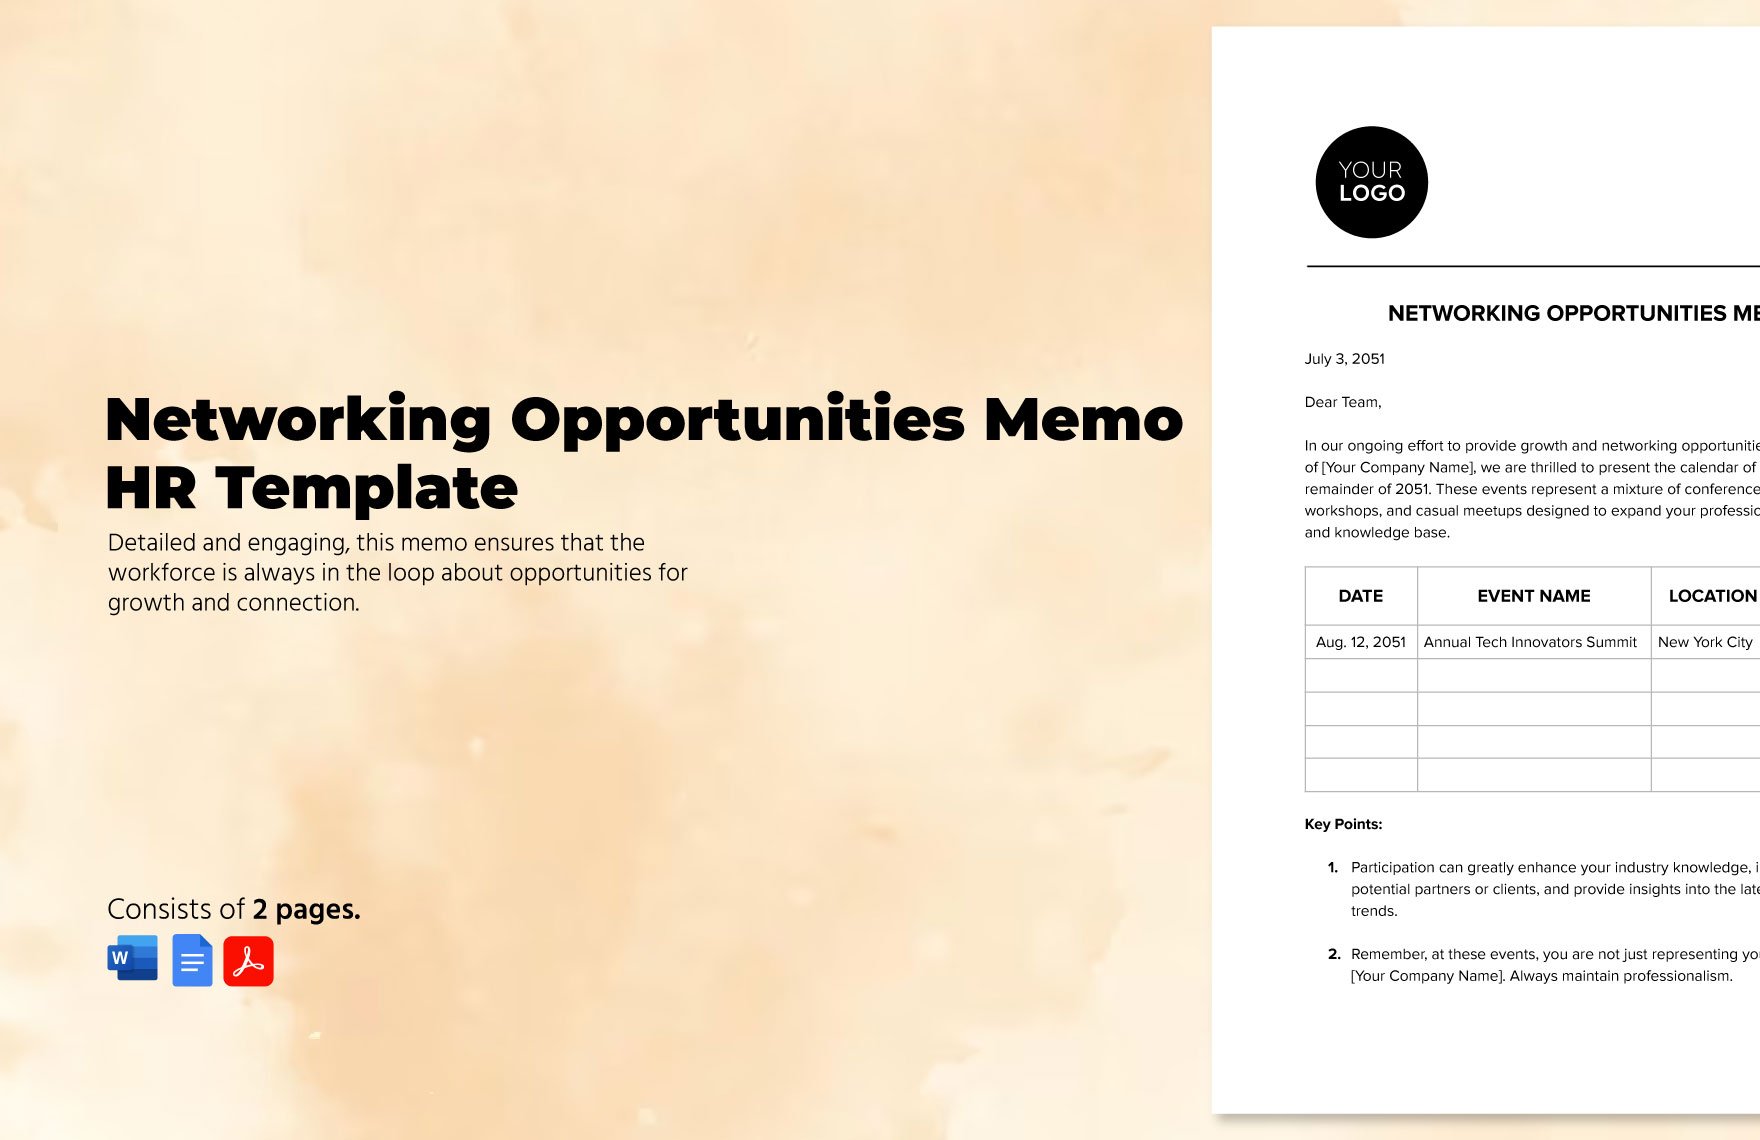 Networking Opportunities Memo HR Template in Word, Google Docs, PDF